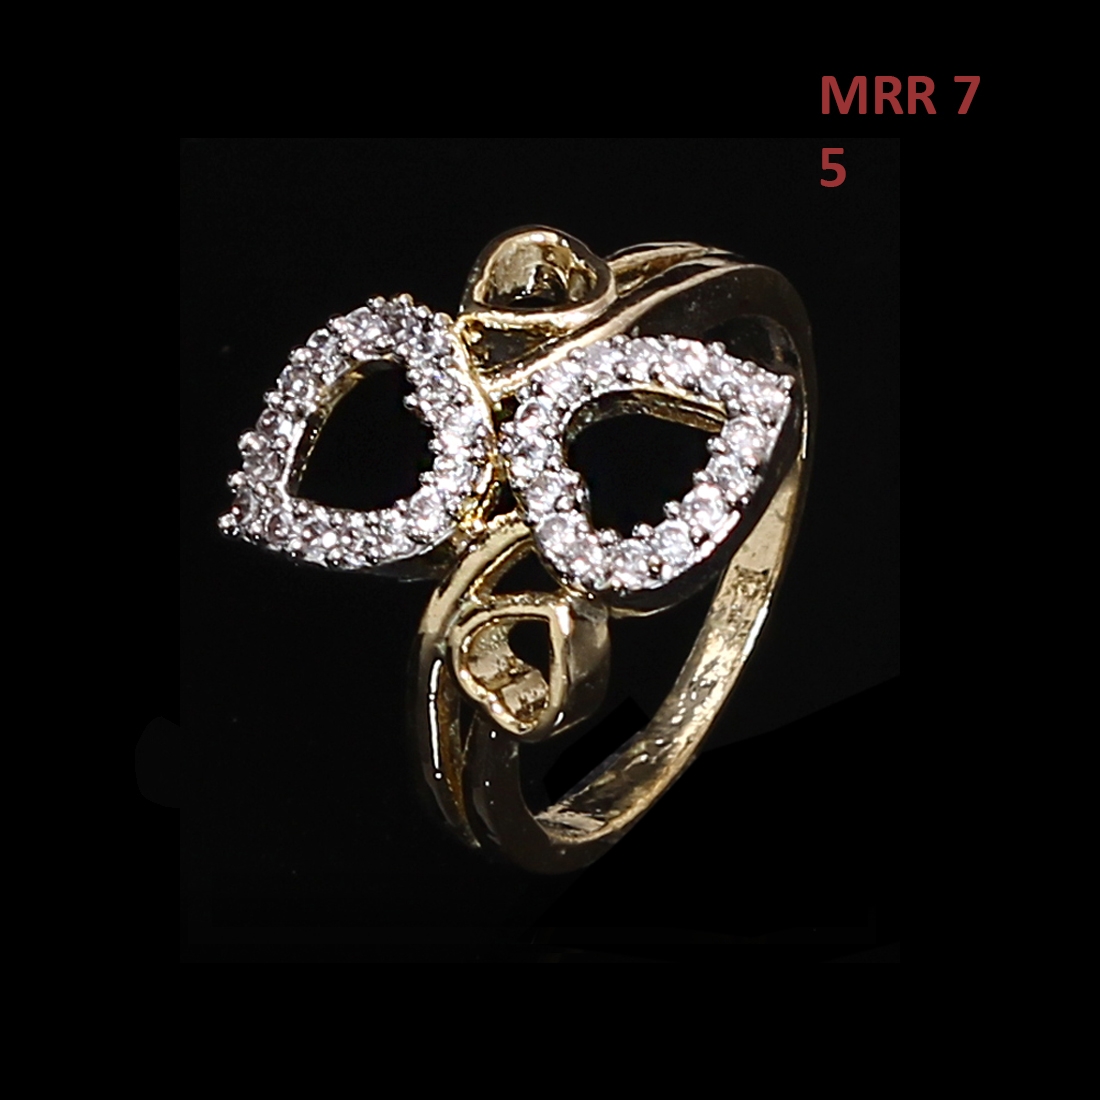 55Carat | Indian Traditional Ethnic Ring Pear Black Onyx,Cubic Zircon Black-White Gorgeous Yellow Gold Plated Designer Jewellery For Girls Ladies Women Mrr 7